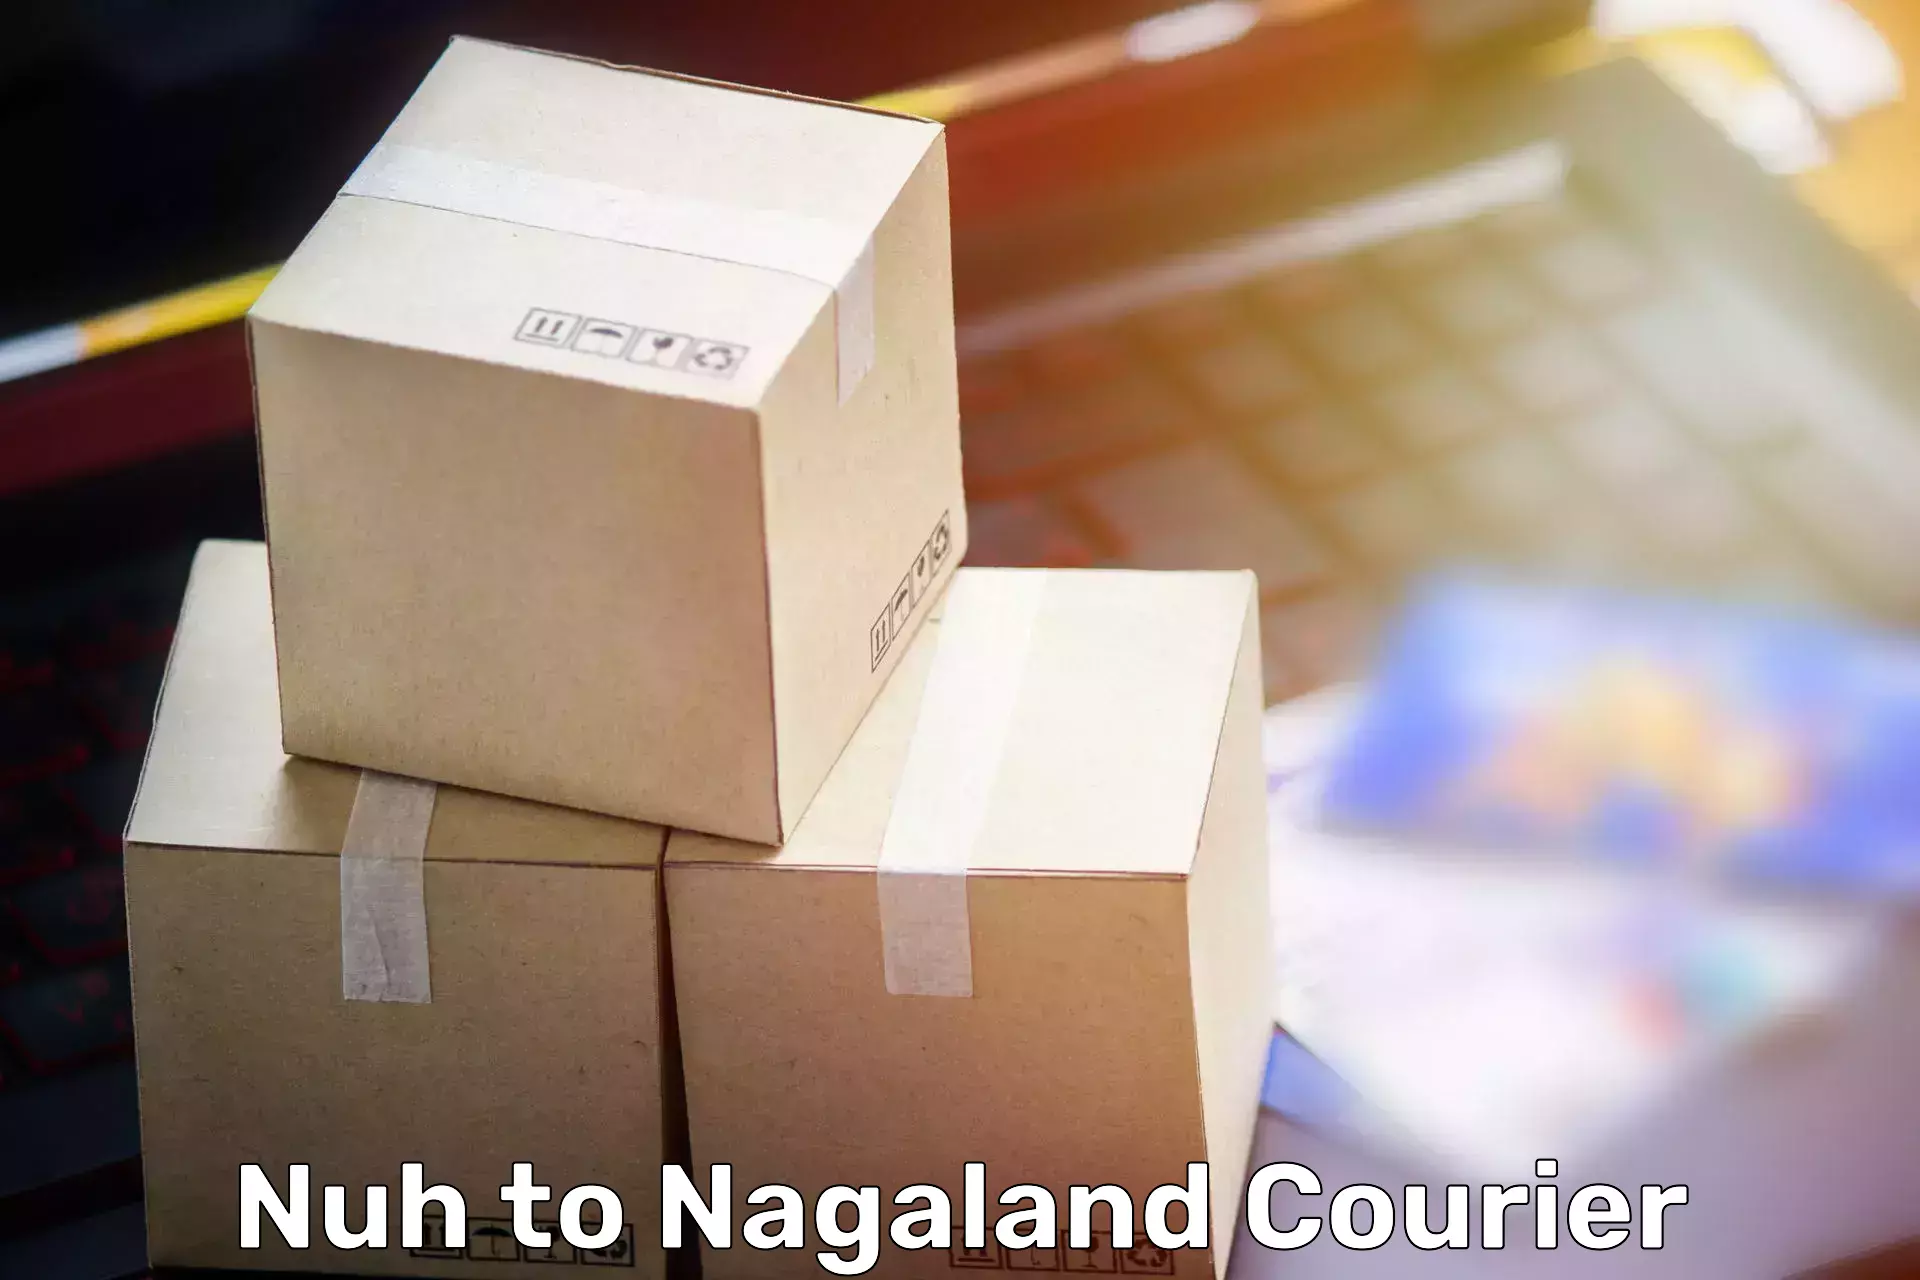 Moving and packing experts Nuh to Nagaland